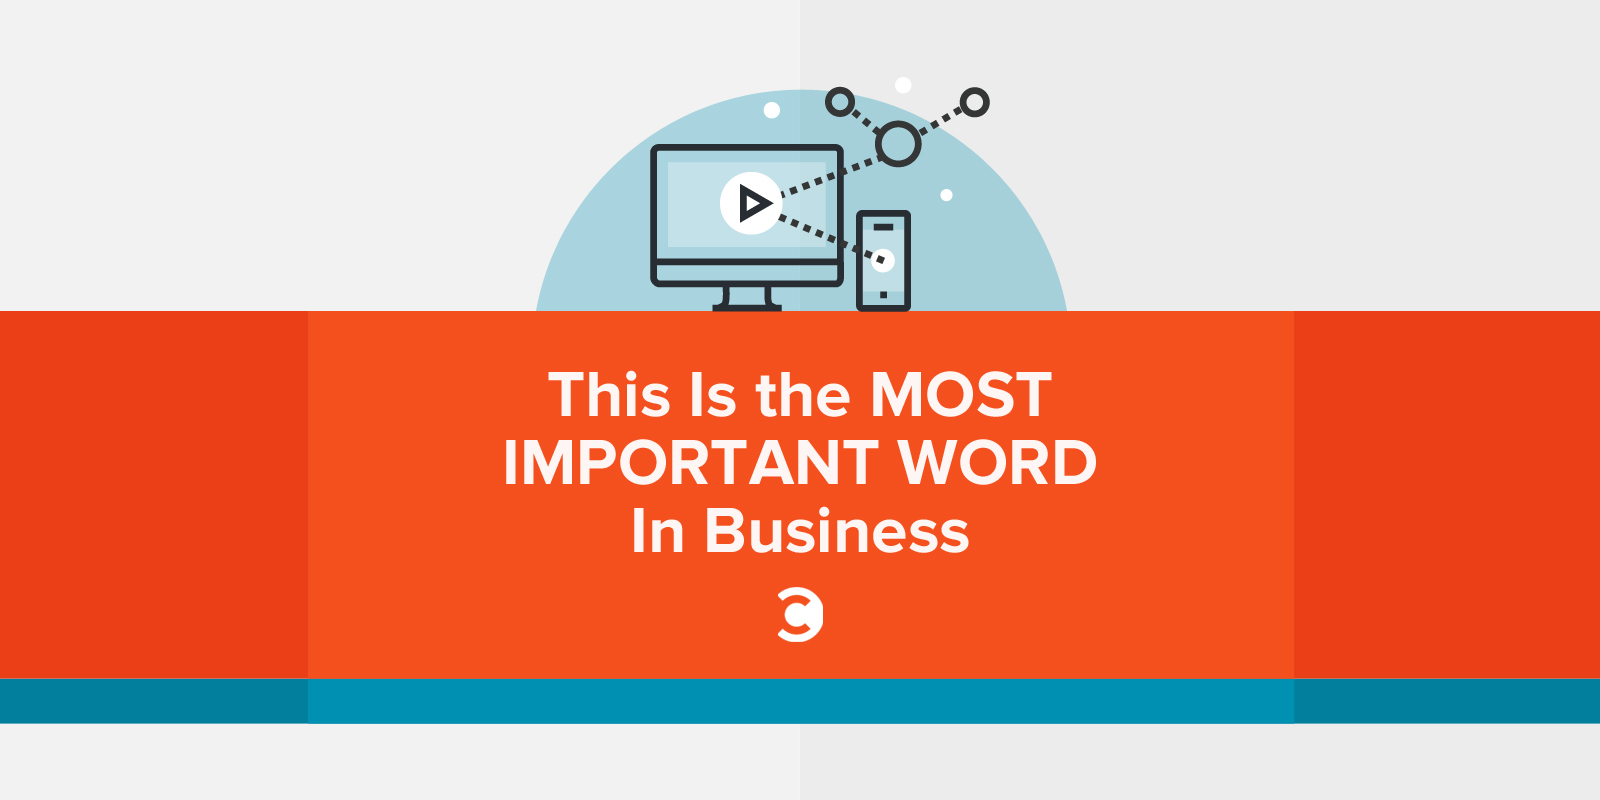 This Is the Most Important Word In Business